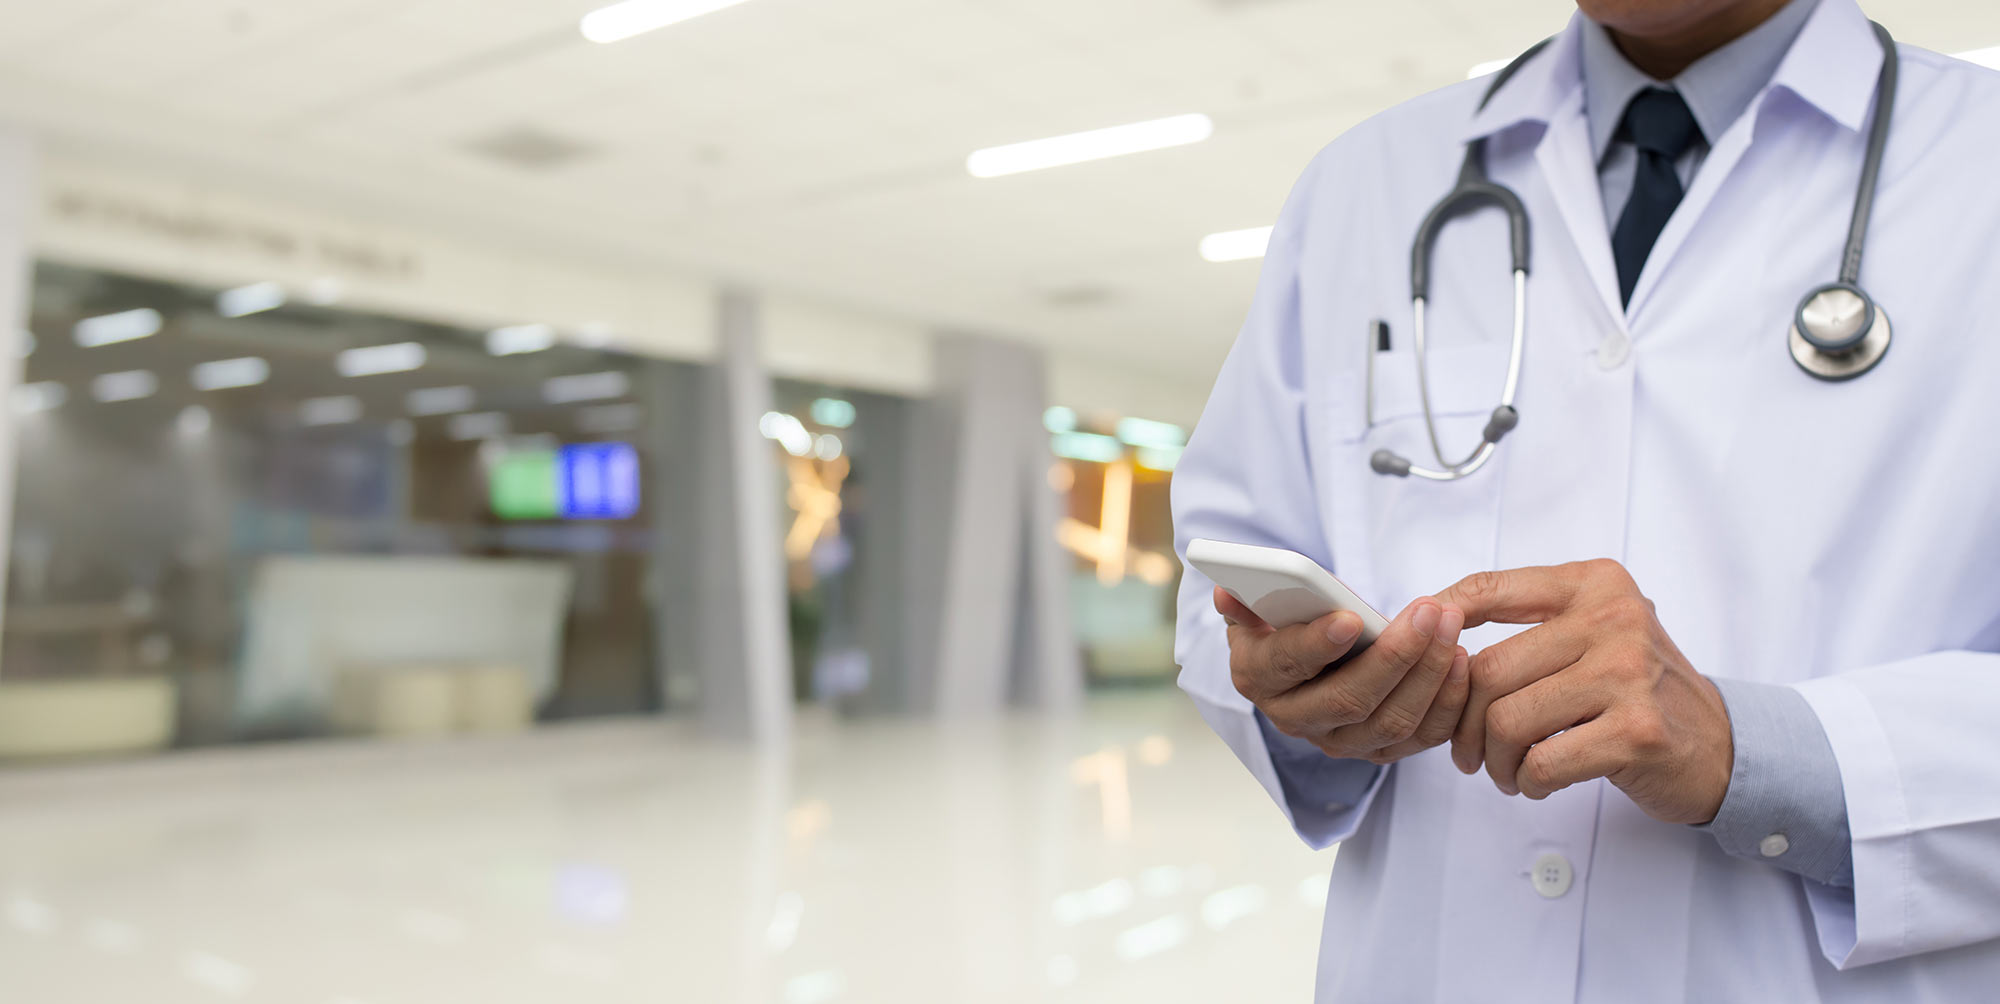 A doctor uses SMS services for healthcare in a hospital setting.